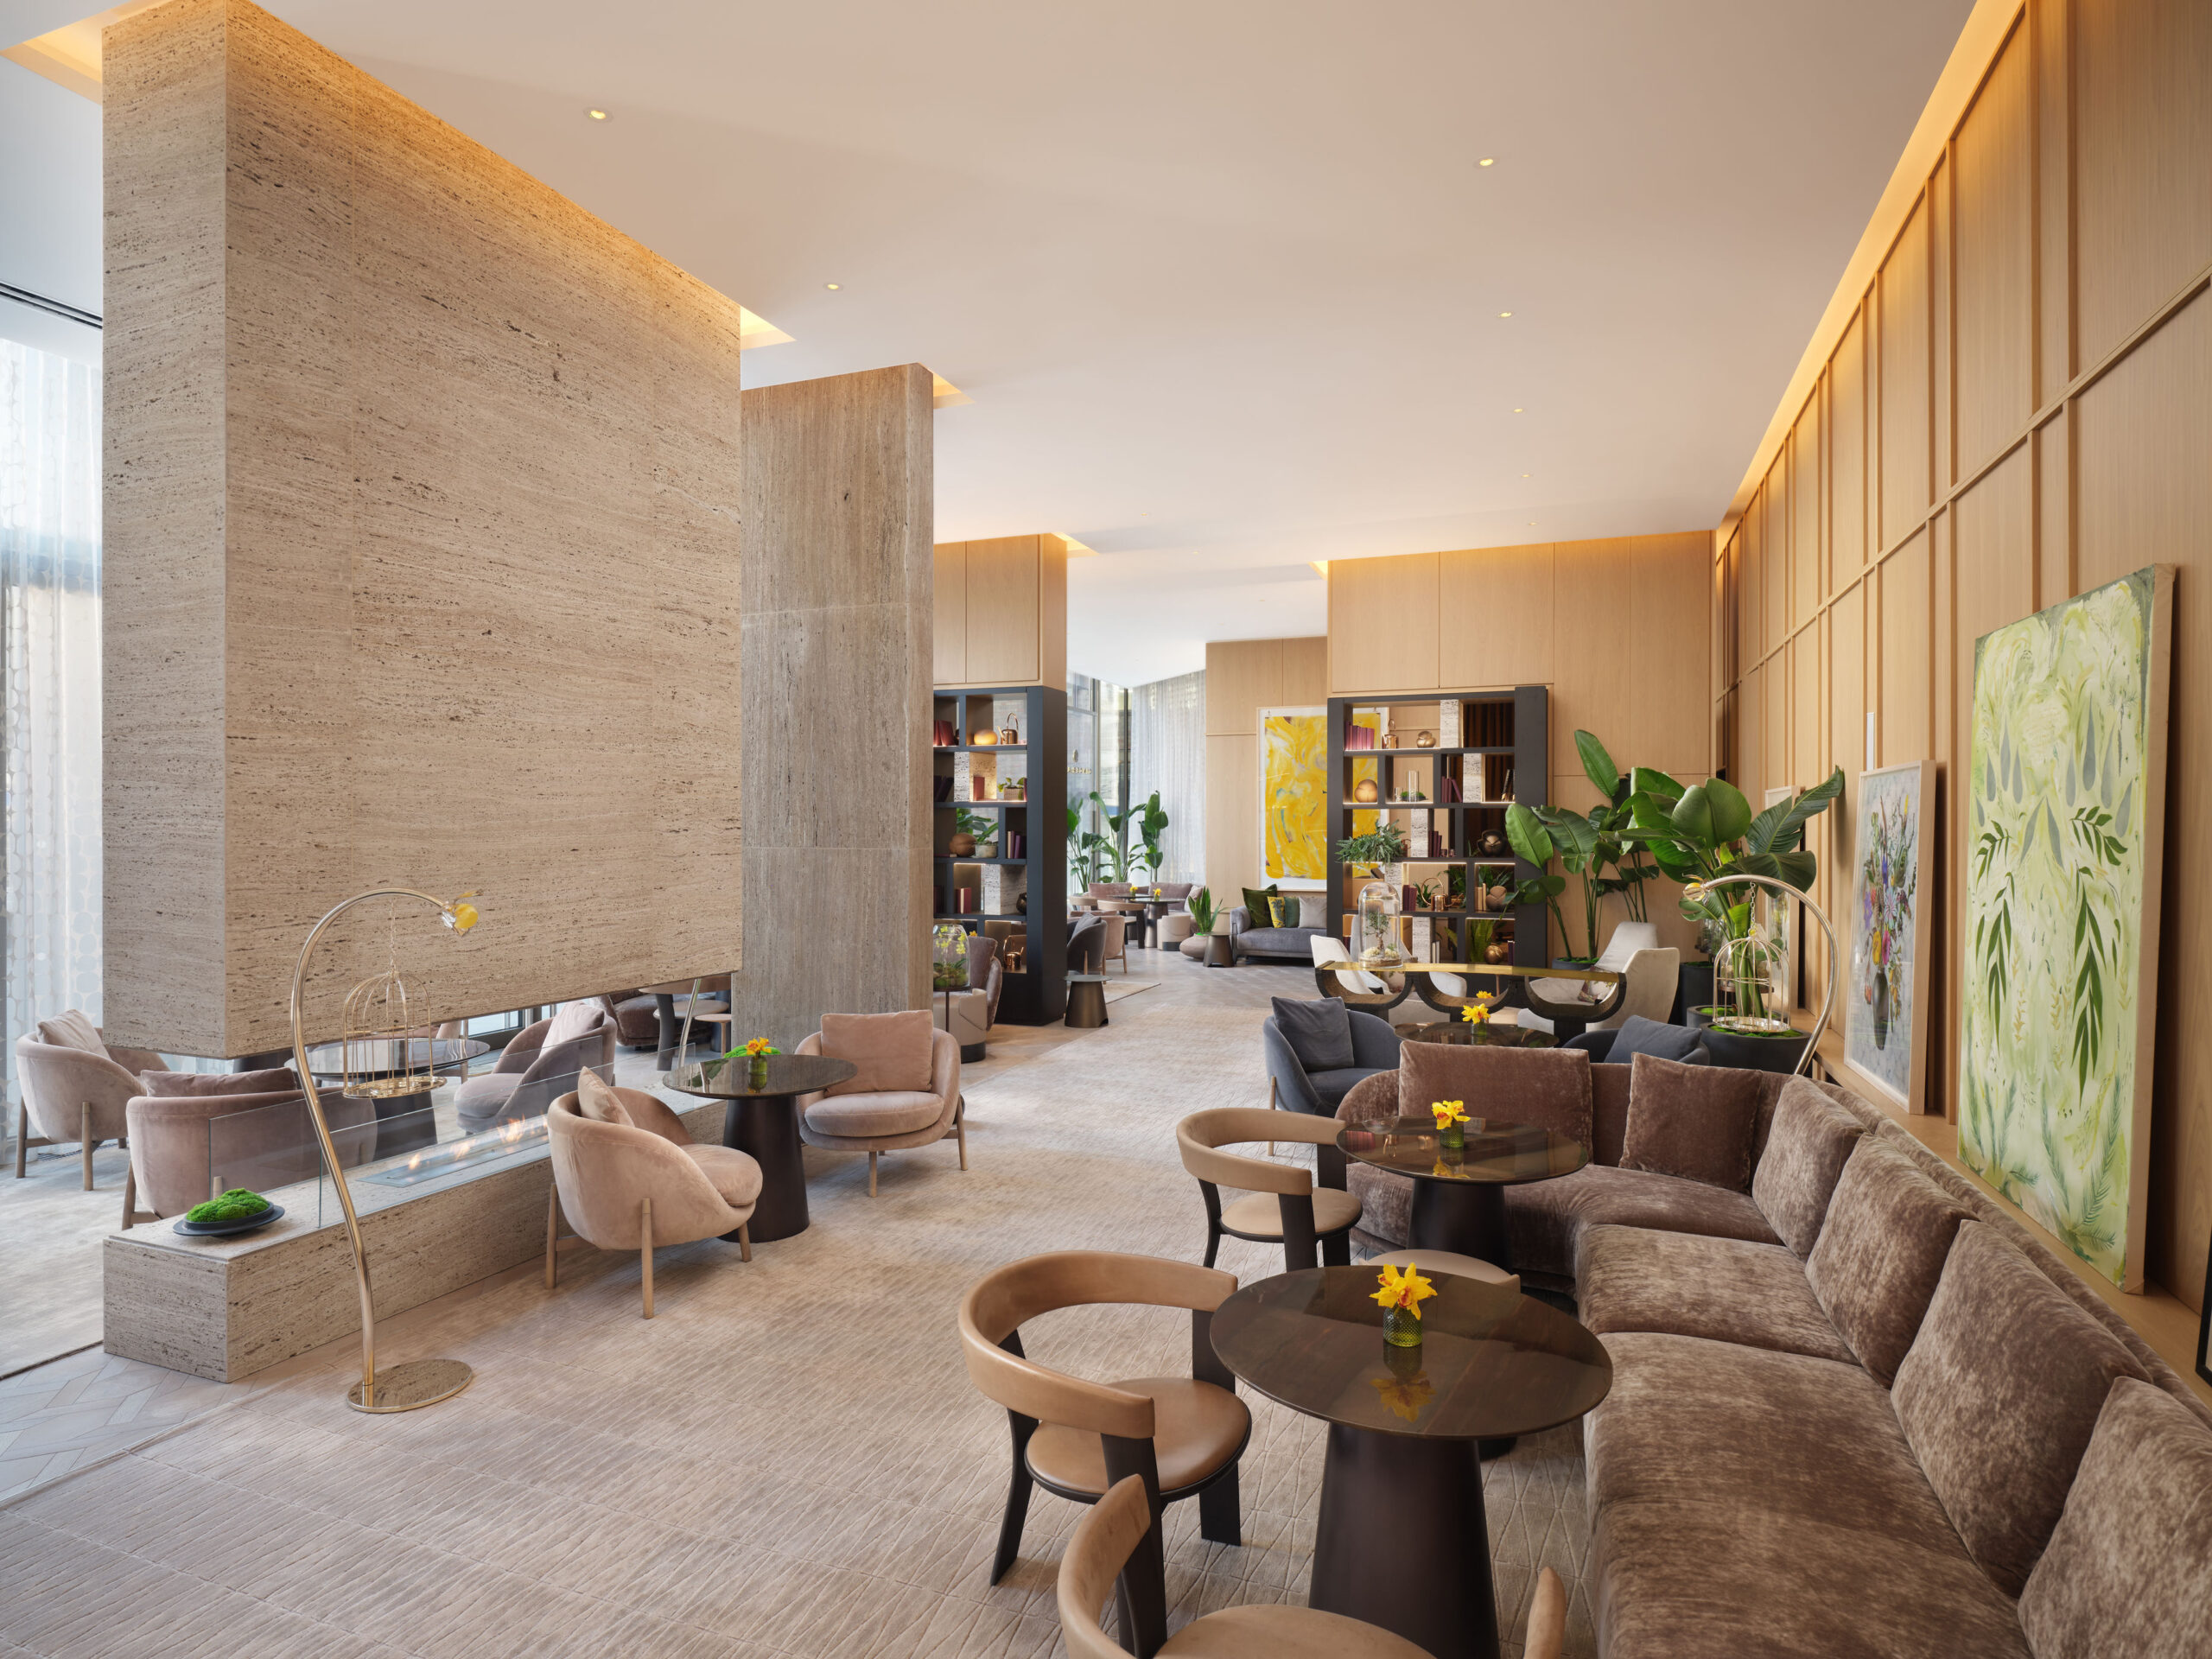 Afternoon Tea Spots in the City of London - The Orchid Lounge at Pan Pacific London - soft lounge seating around a modern central fireplace